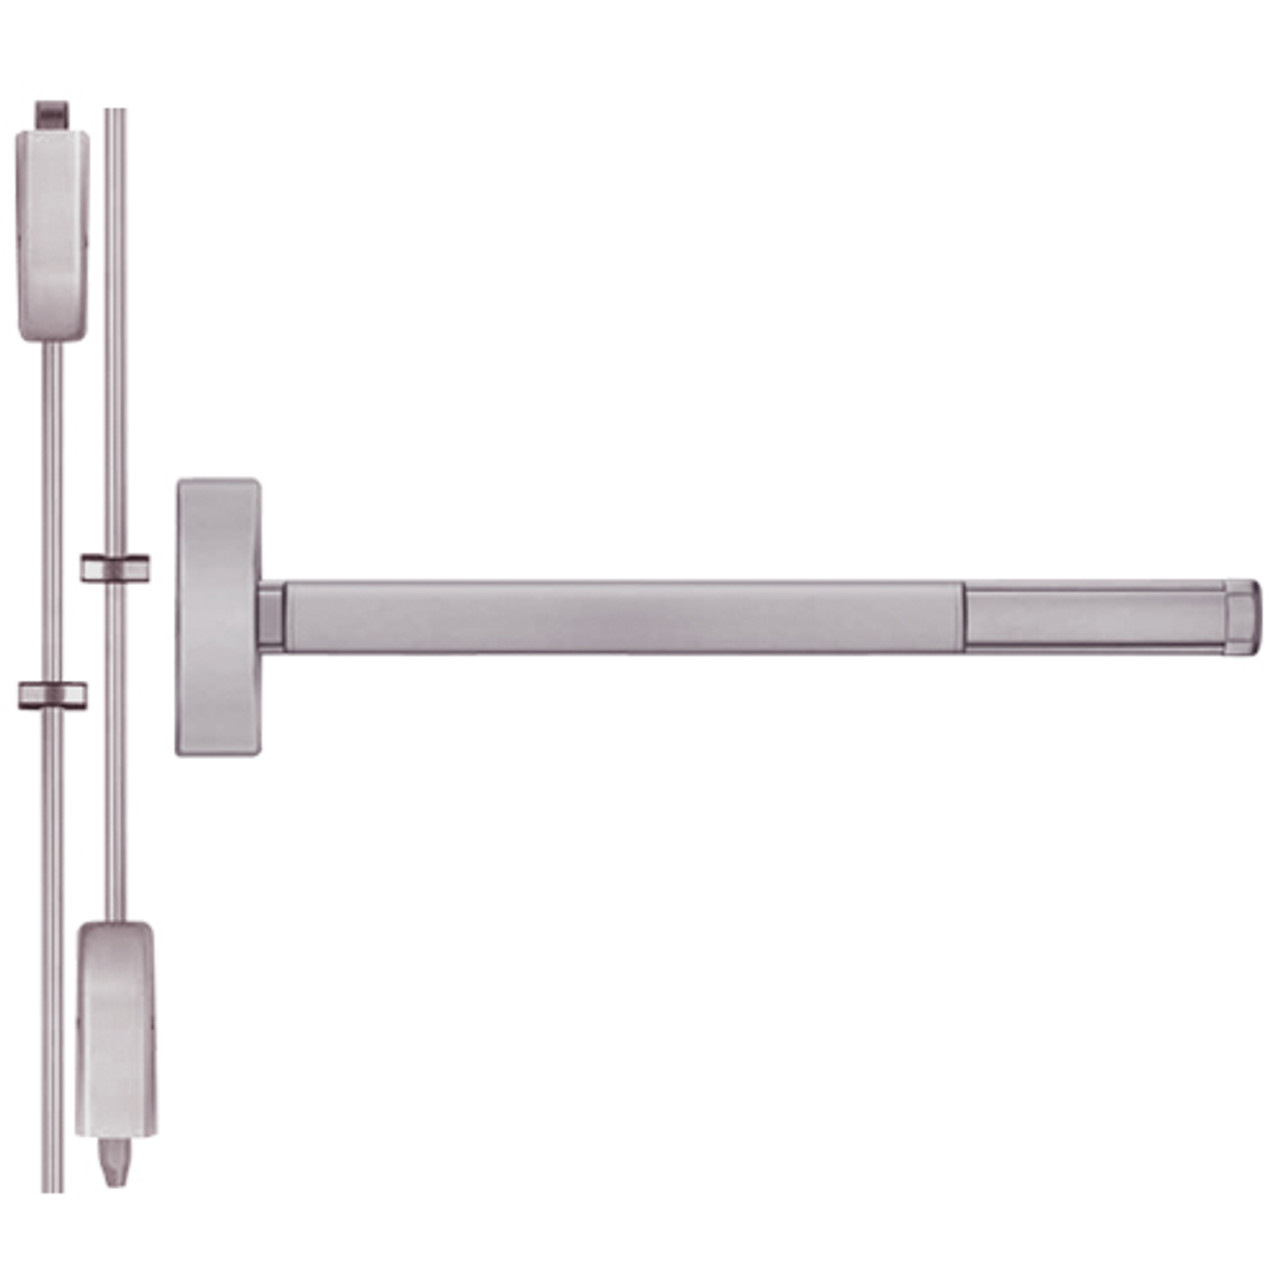 TSFL2202LBR-630-48 PHI 2200 Series Apex Surface Vertical Rod Device with Touchbar Monitoring Switch Prepped for Dummy Trim in Satin Stainless Steel Finish